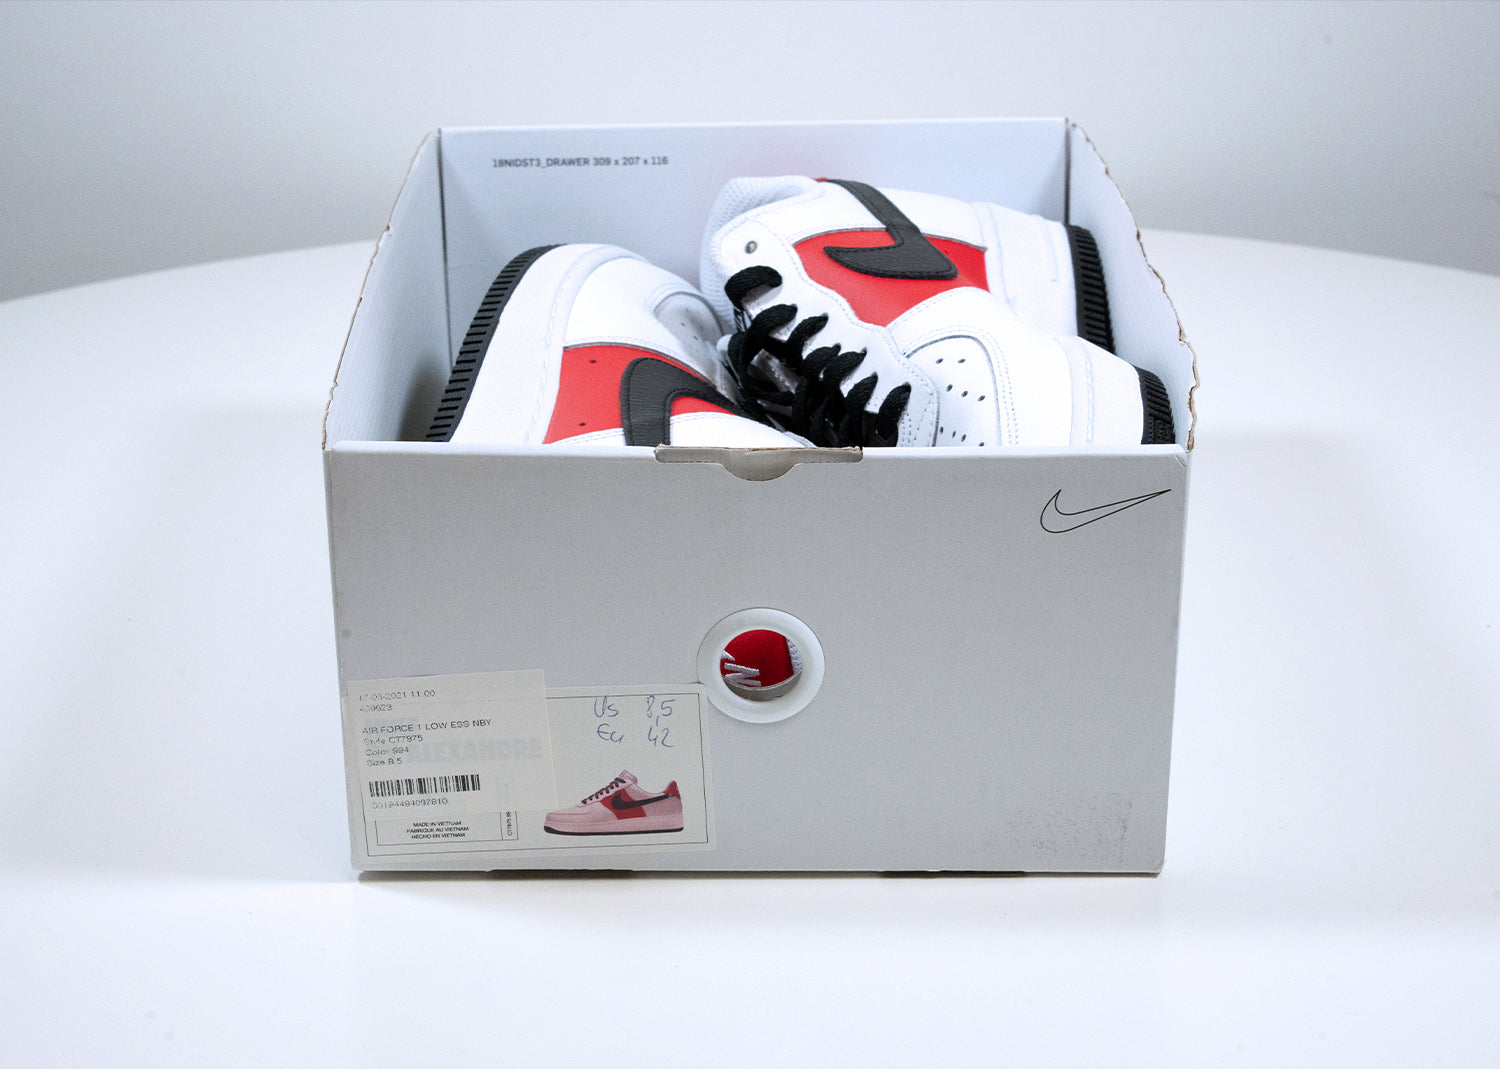 Second Chance - Air Force 1 ID White/Red/Black - 42